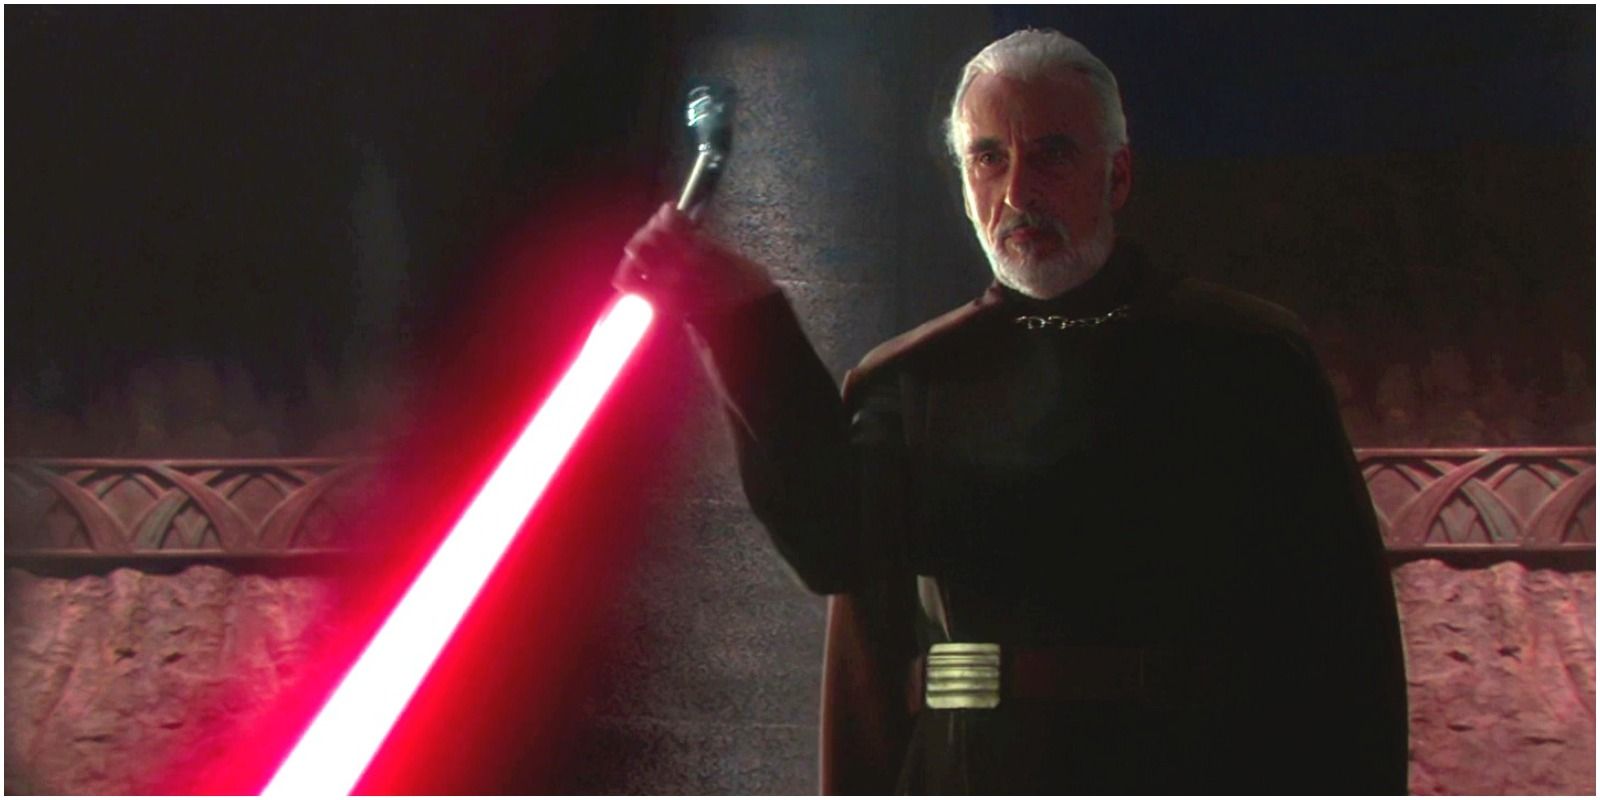 Count Dooku wields a red lightsaber while stood in front of a stone wall